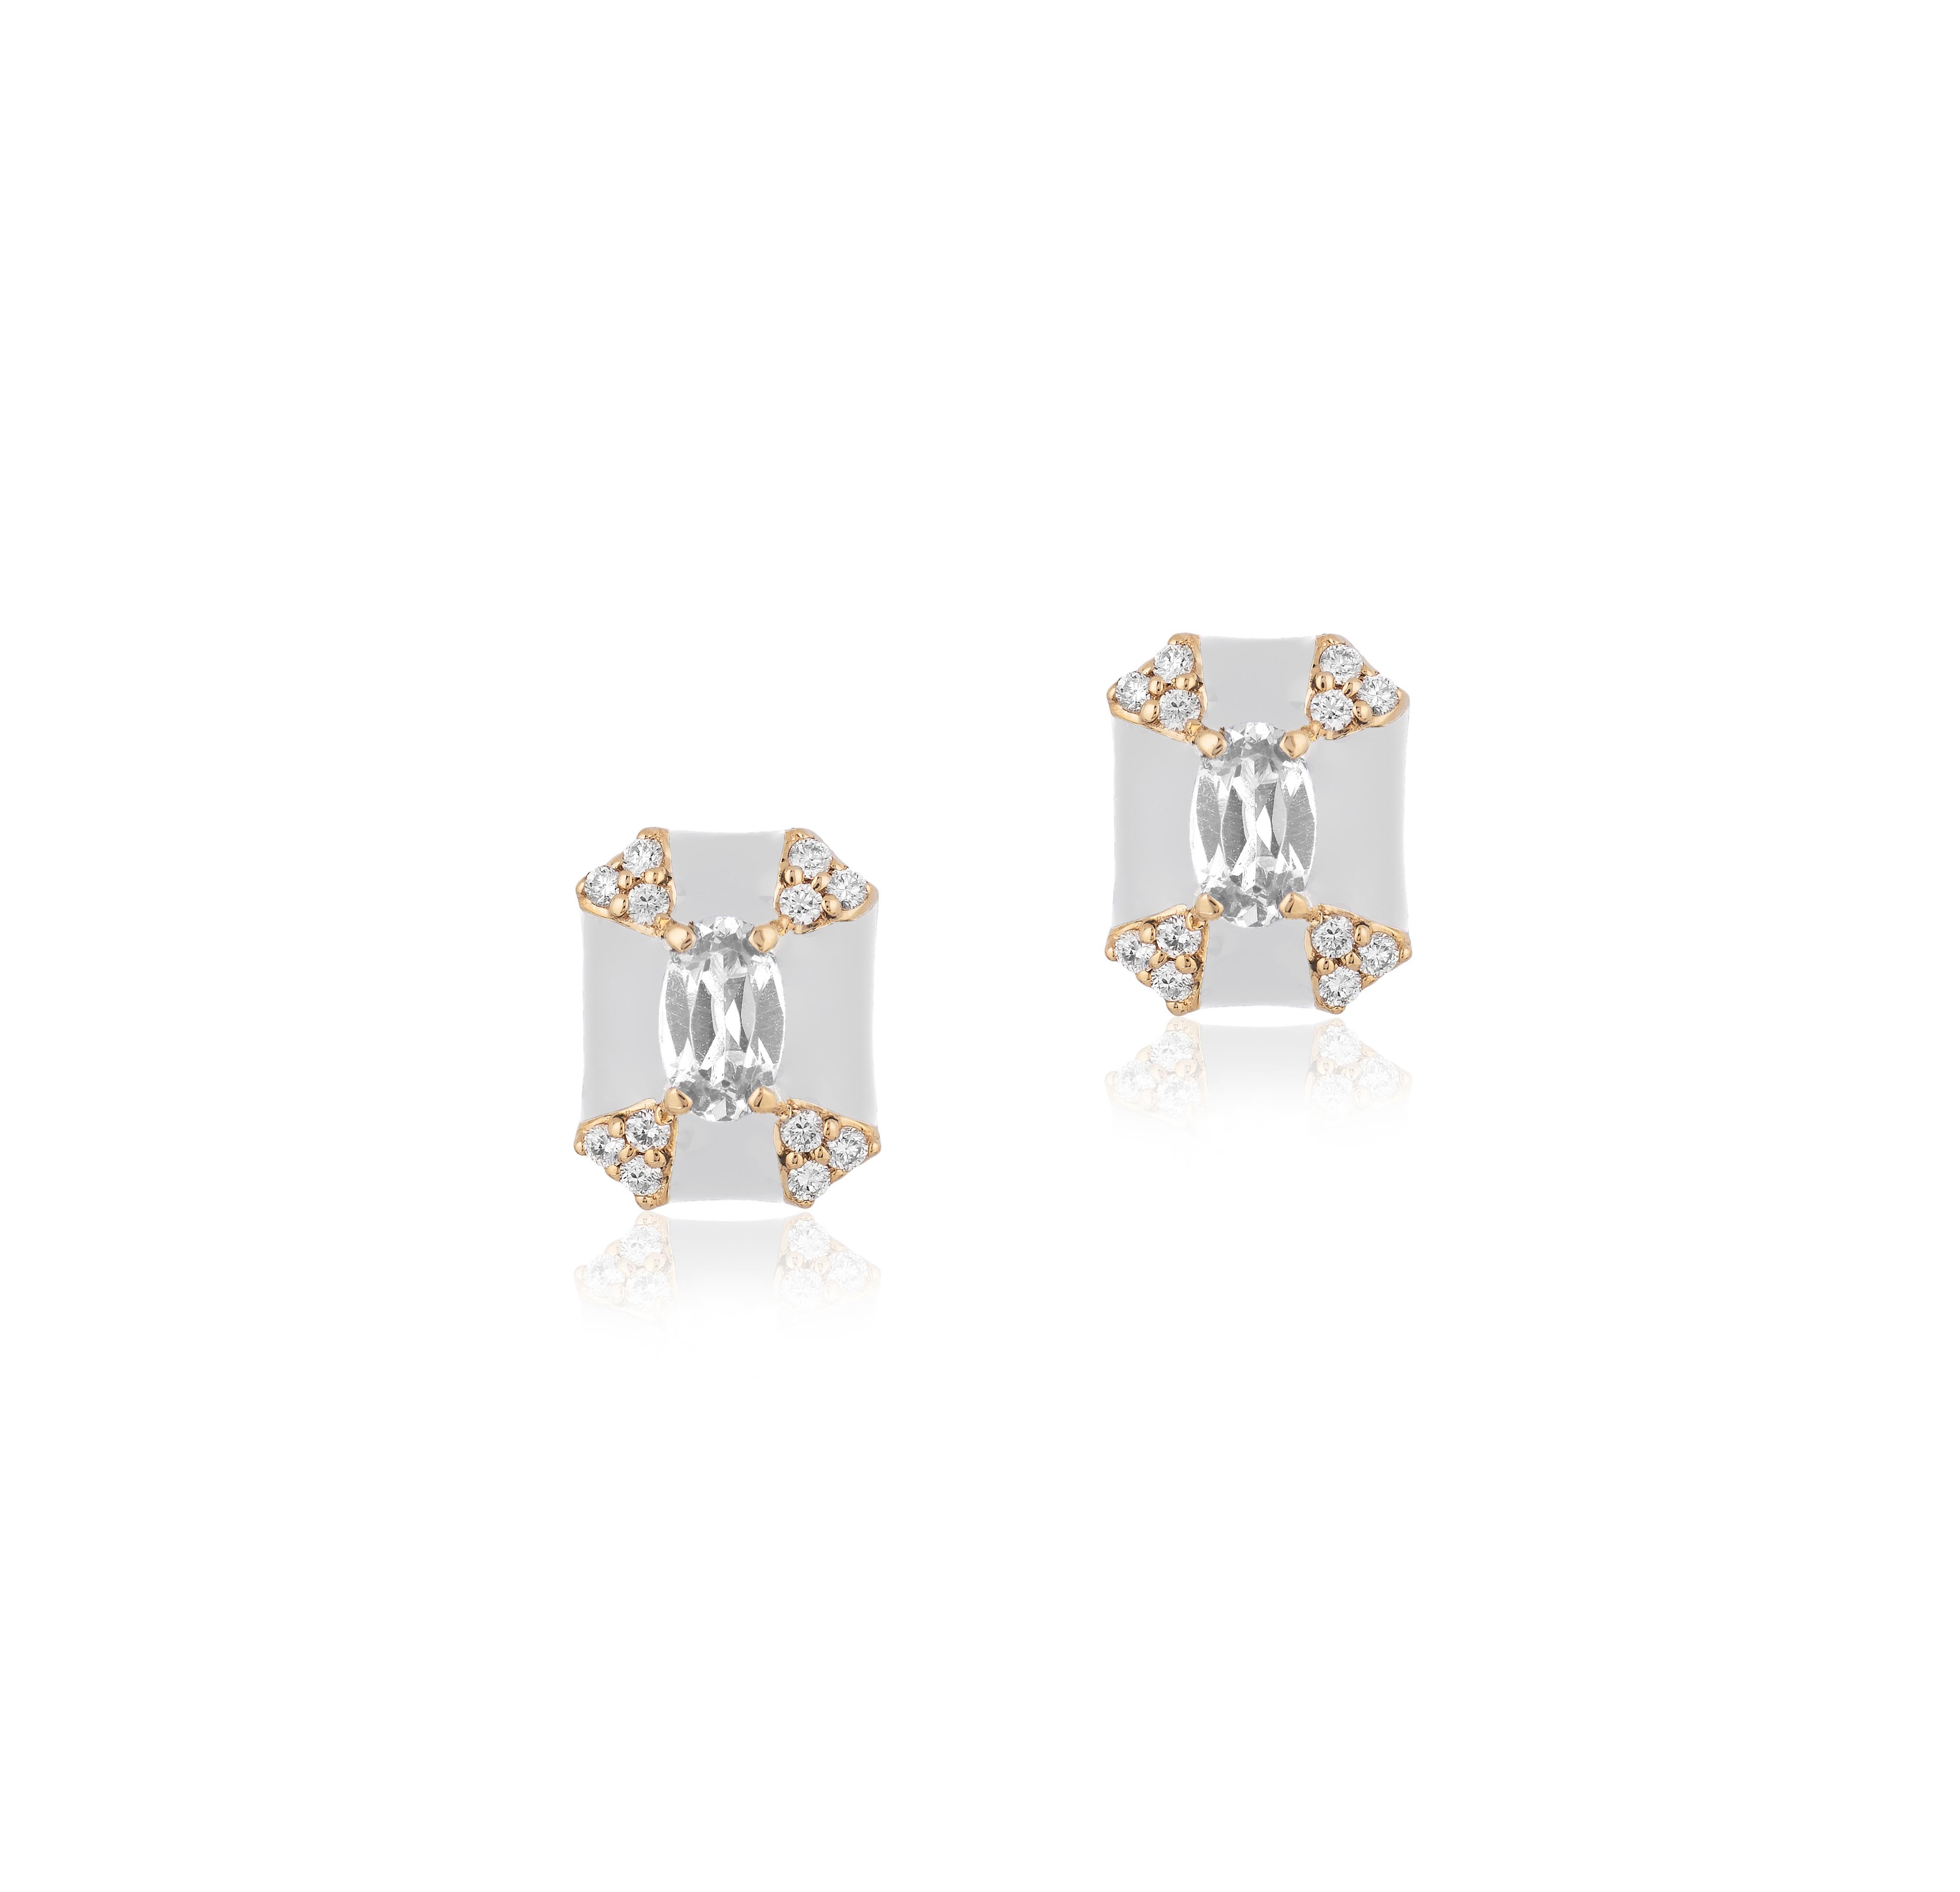 Queen' Octagon White Enamel Stud Earrings with Diamonds in 18K Yellow Gold
Diamonds: G-H/ VS; Approx. Wt: 0.62 Carats